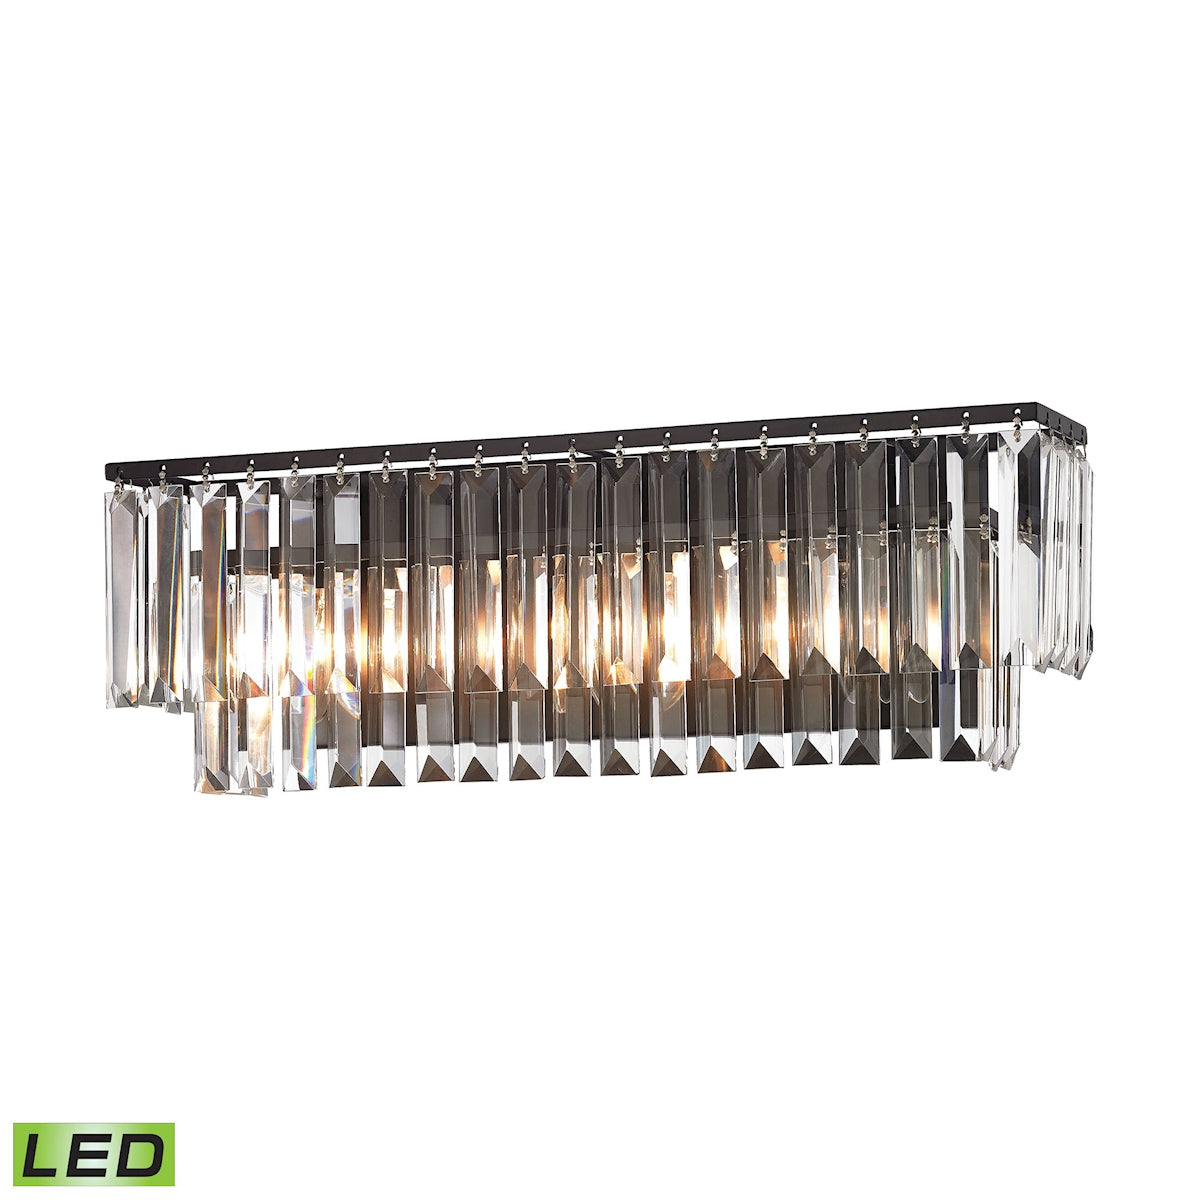 ELK Lighting 15222/3-LED Palacial 3-Light Vanity Lamp in Oil Rubbed Bronze with Clear Crystal - Includes LED Bulbs